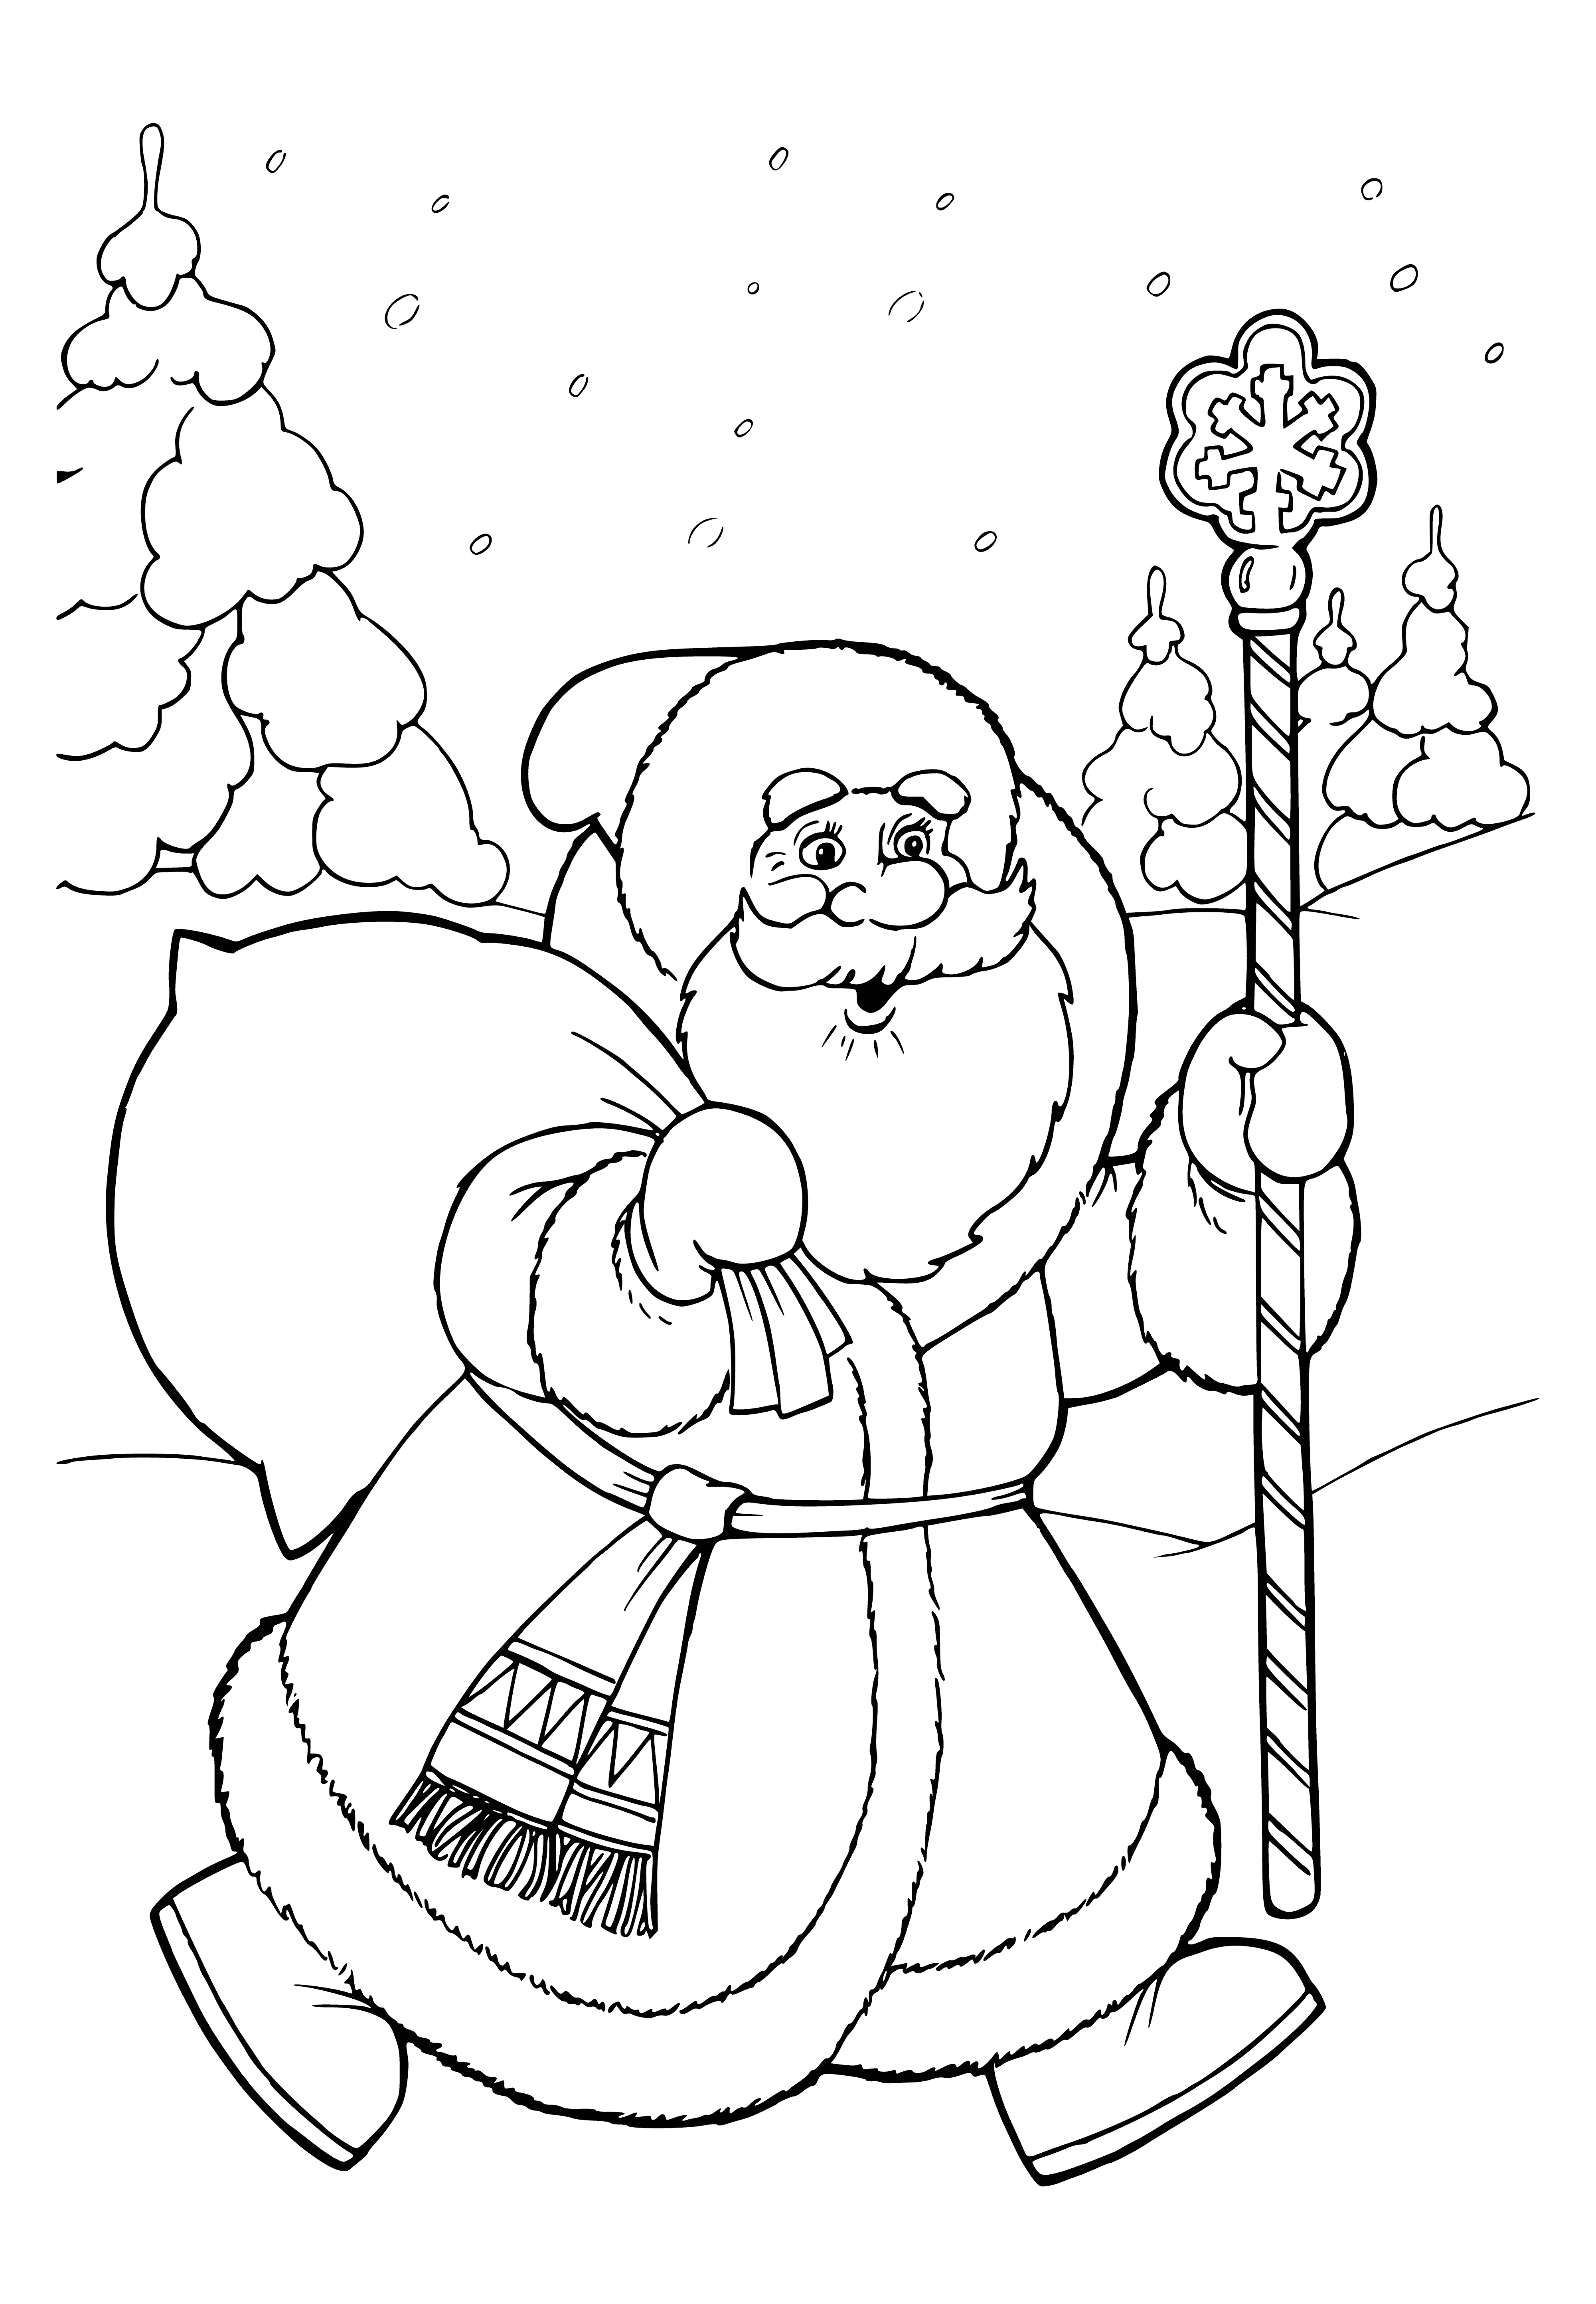 coloring page: Santa Claus is a jolly old man with a white beard, red suit, and sack of presents. He's ready to spread Christmas cheer with a smile!